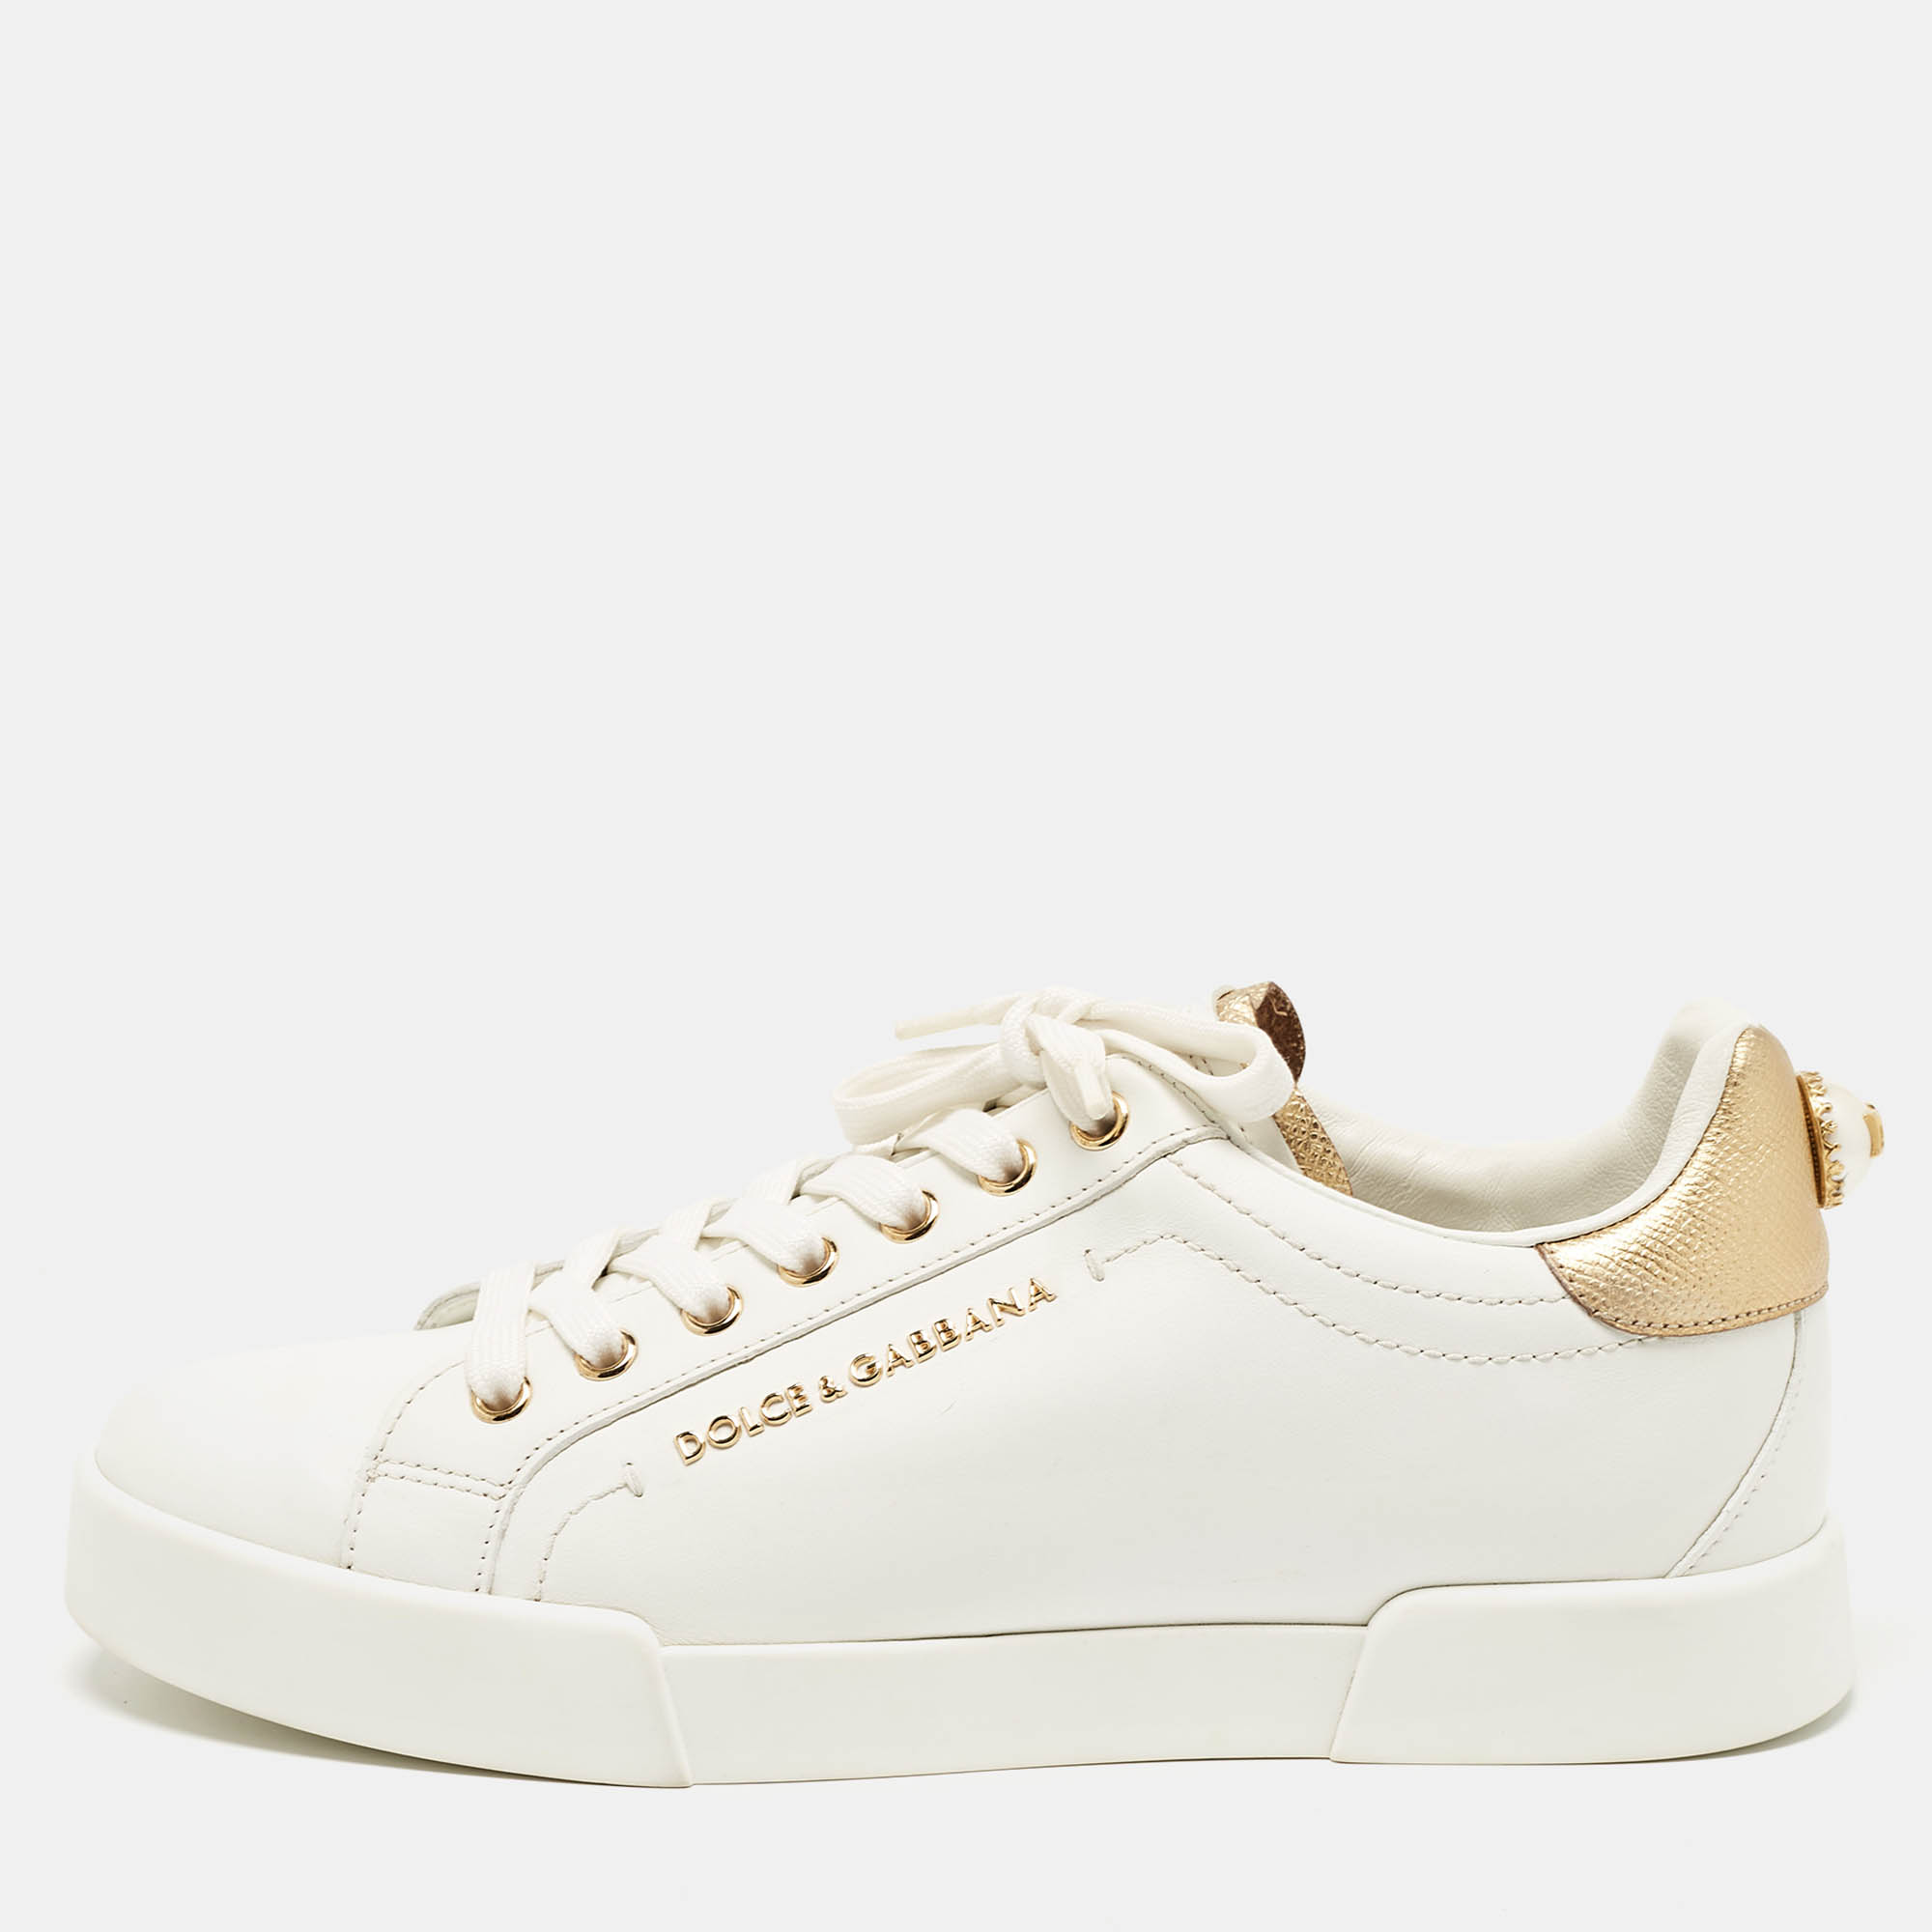 These Dolce and Gabbana sneakers are luxurious. They are crafted from white leather styled with lace ups and decorated with faux pearls on the counters. The sneakers are high in both appeal and comfort.